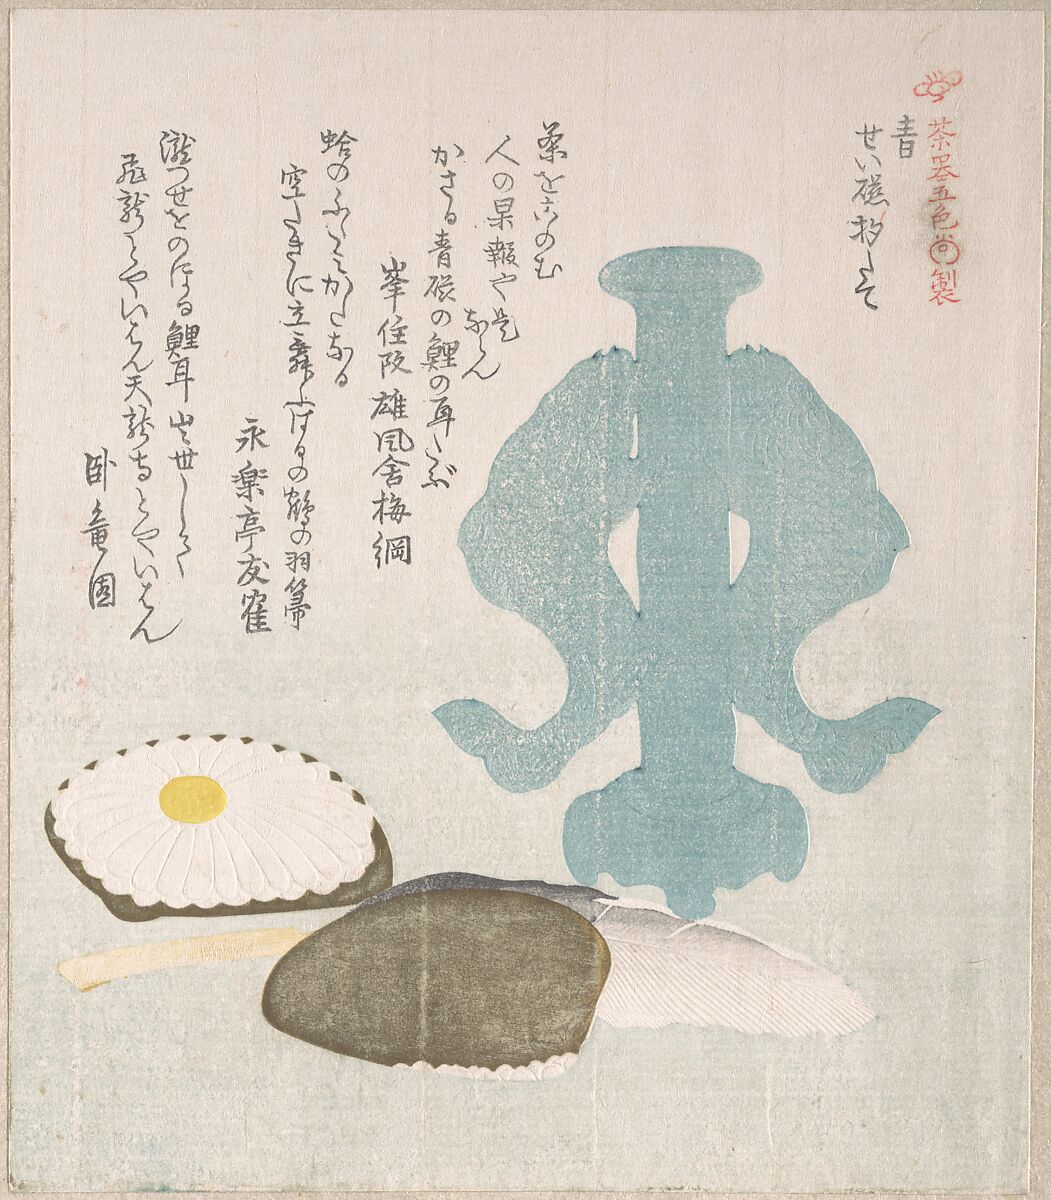 Blue; Dipper-holder of Celadon and Other Objects for the Tea Ceremony, Kubo Shunman (Japanese, 1757–1820), Part of an album of woodblock prints (surimono); ink and color on paper, Japan 